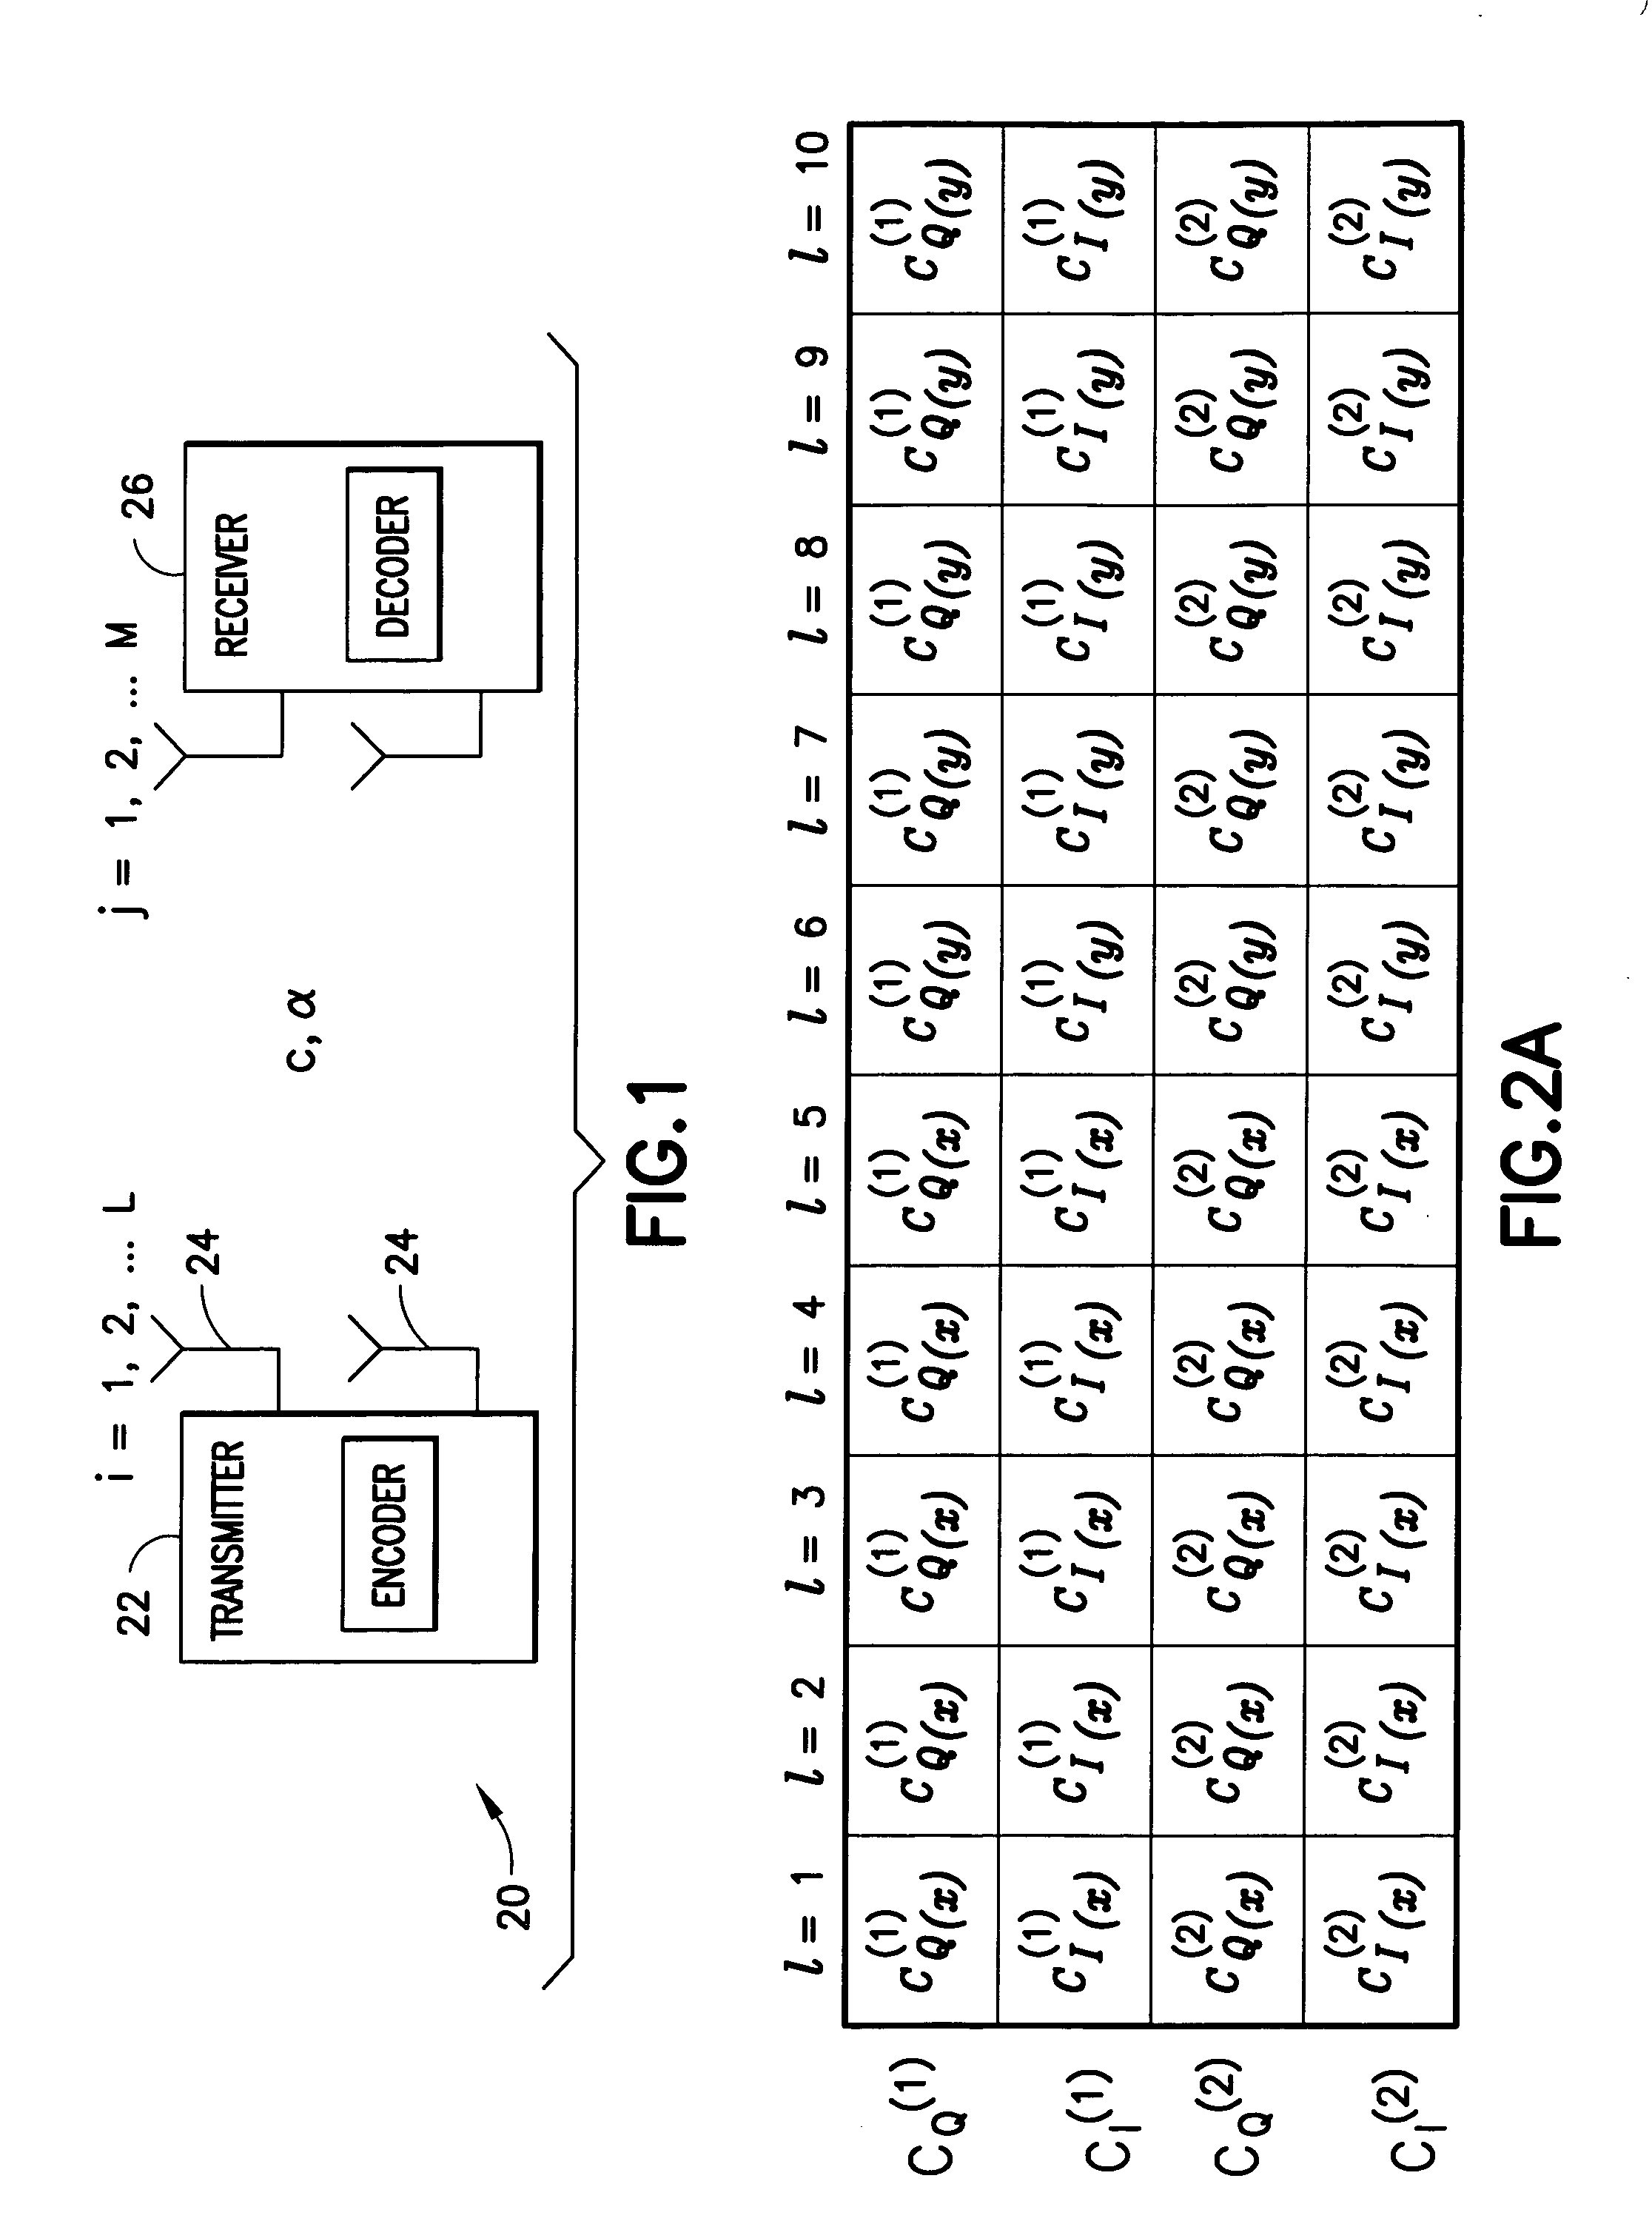 Method and apparatus using coordinate interleaving to increase diversity in a MIMO system